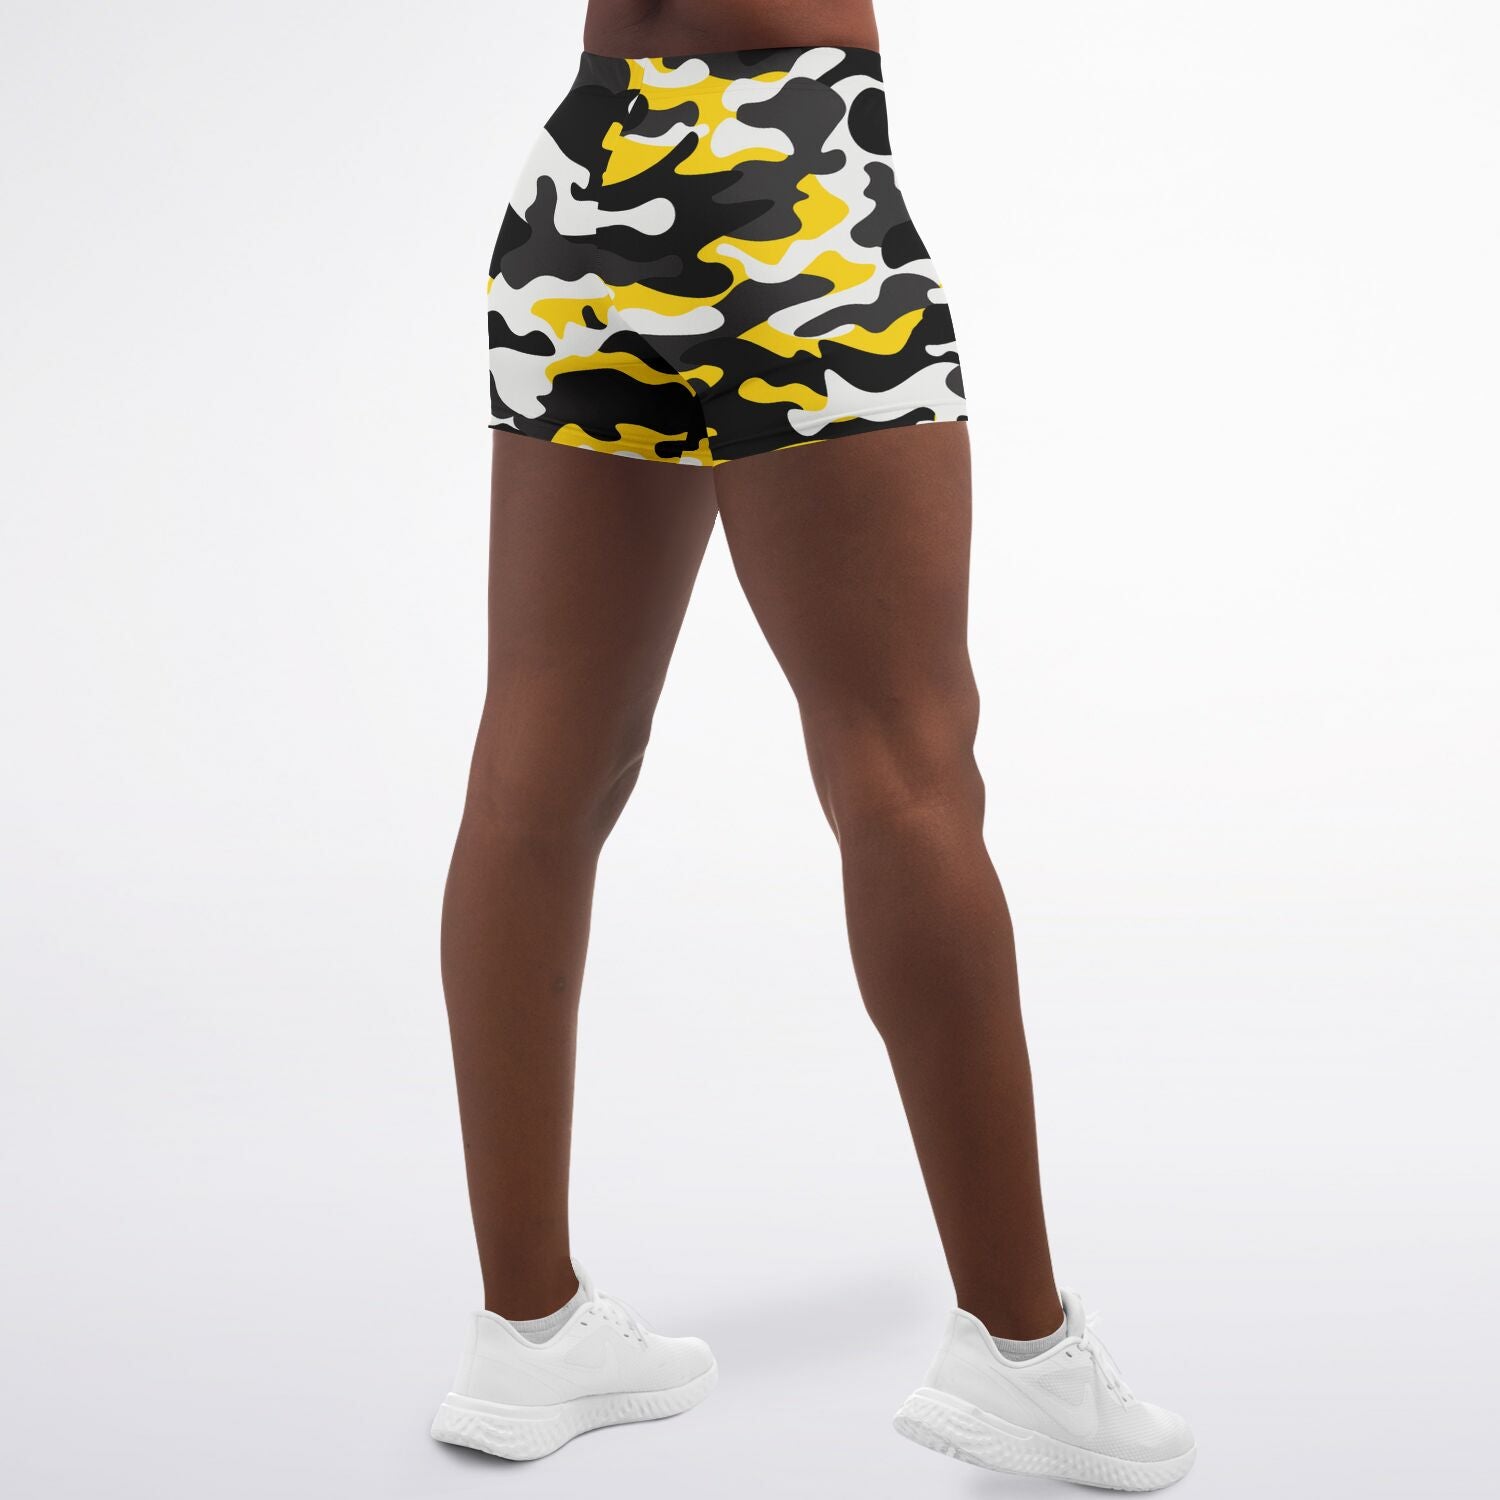 Women's Urban Jungle Yellow White Black Camouflage Mid-Rise Athletic Booty Shorts